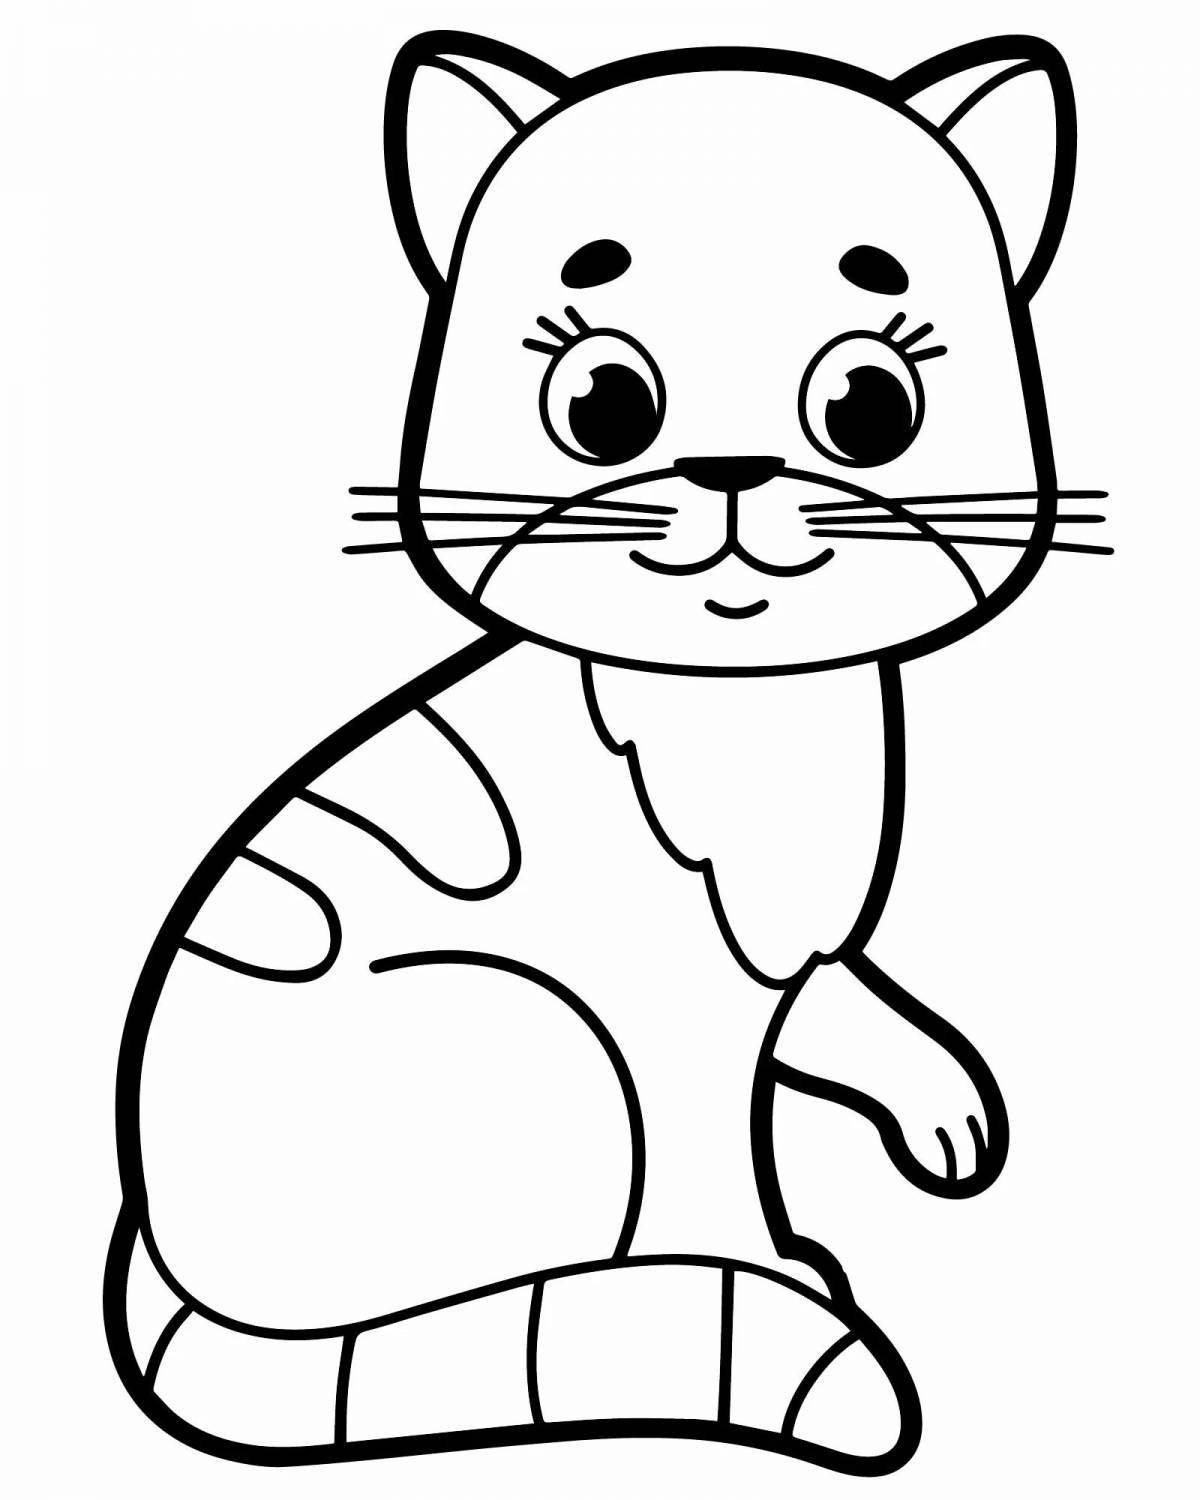 Adorable cat coloring book for kids 2-3 years old